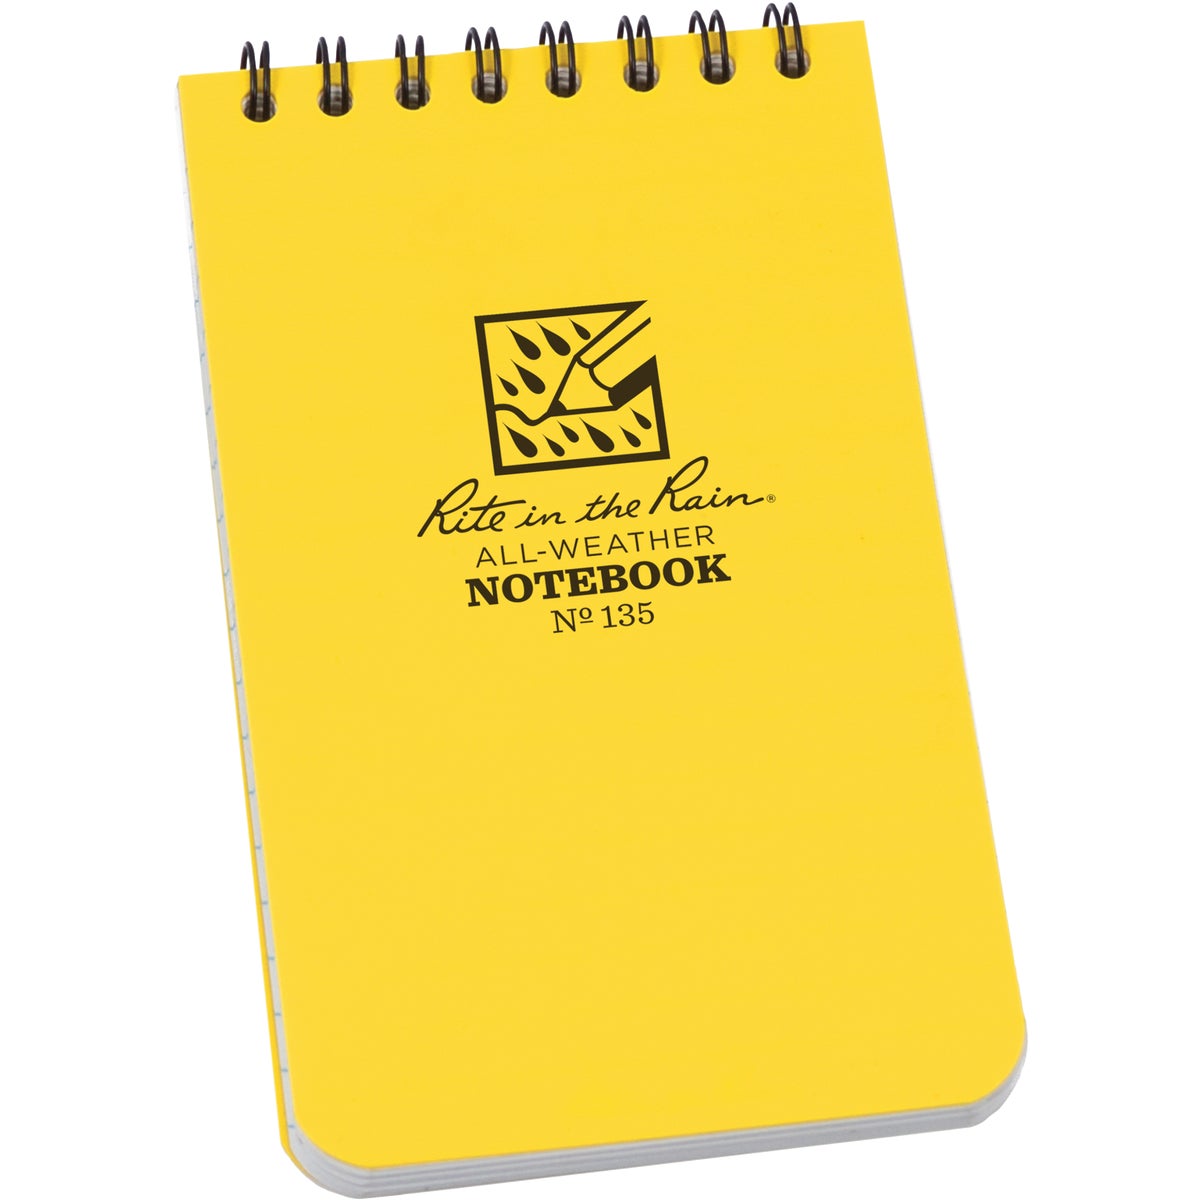 Item 303705, Pocket notebook is conveniently sized and tough enough to survive any of 